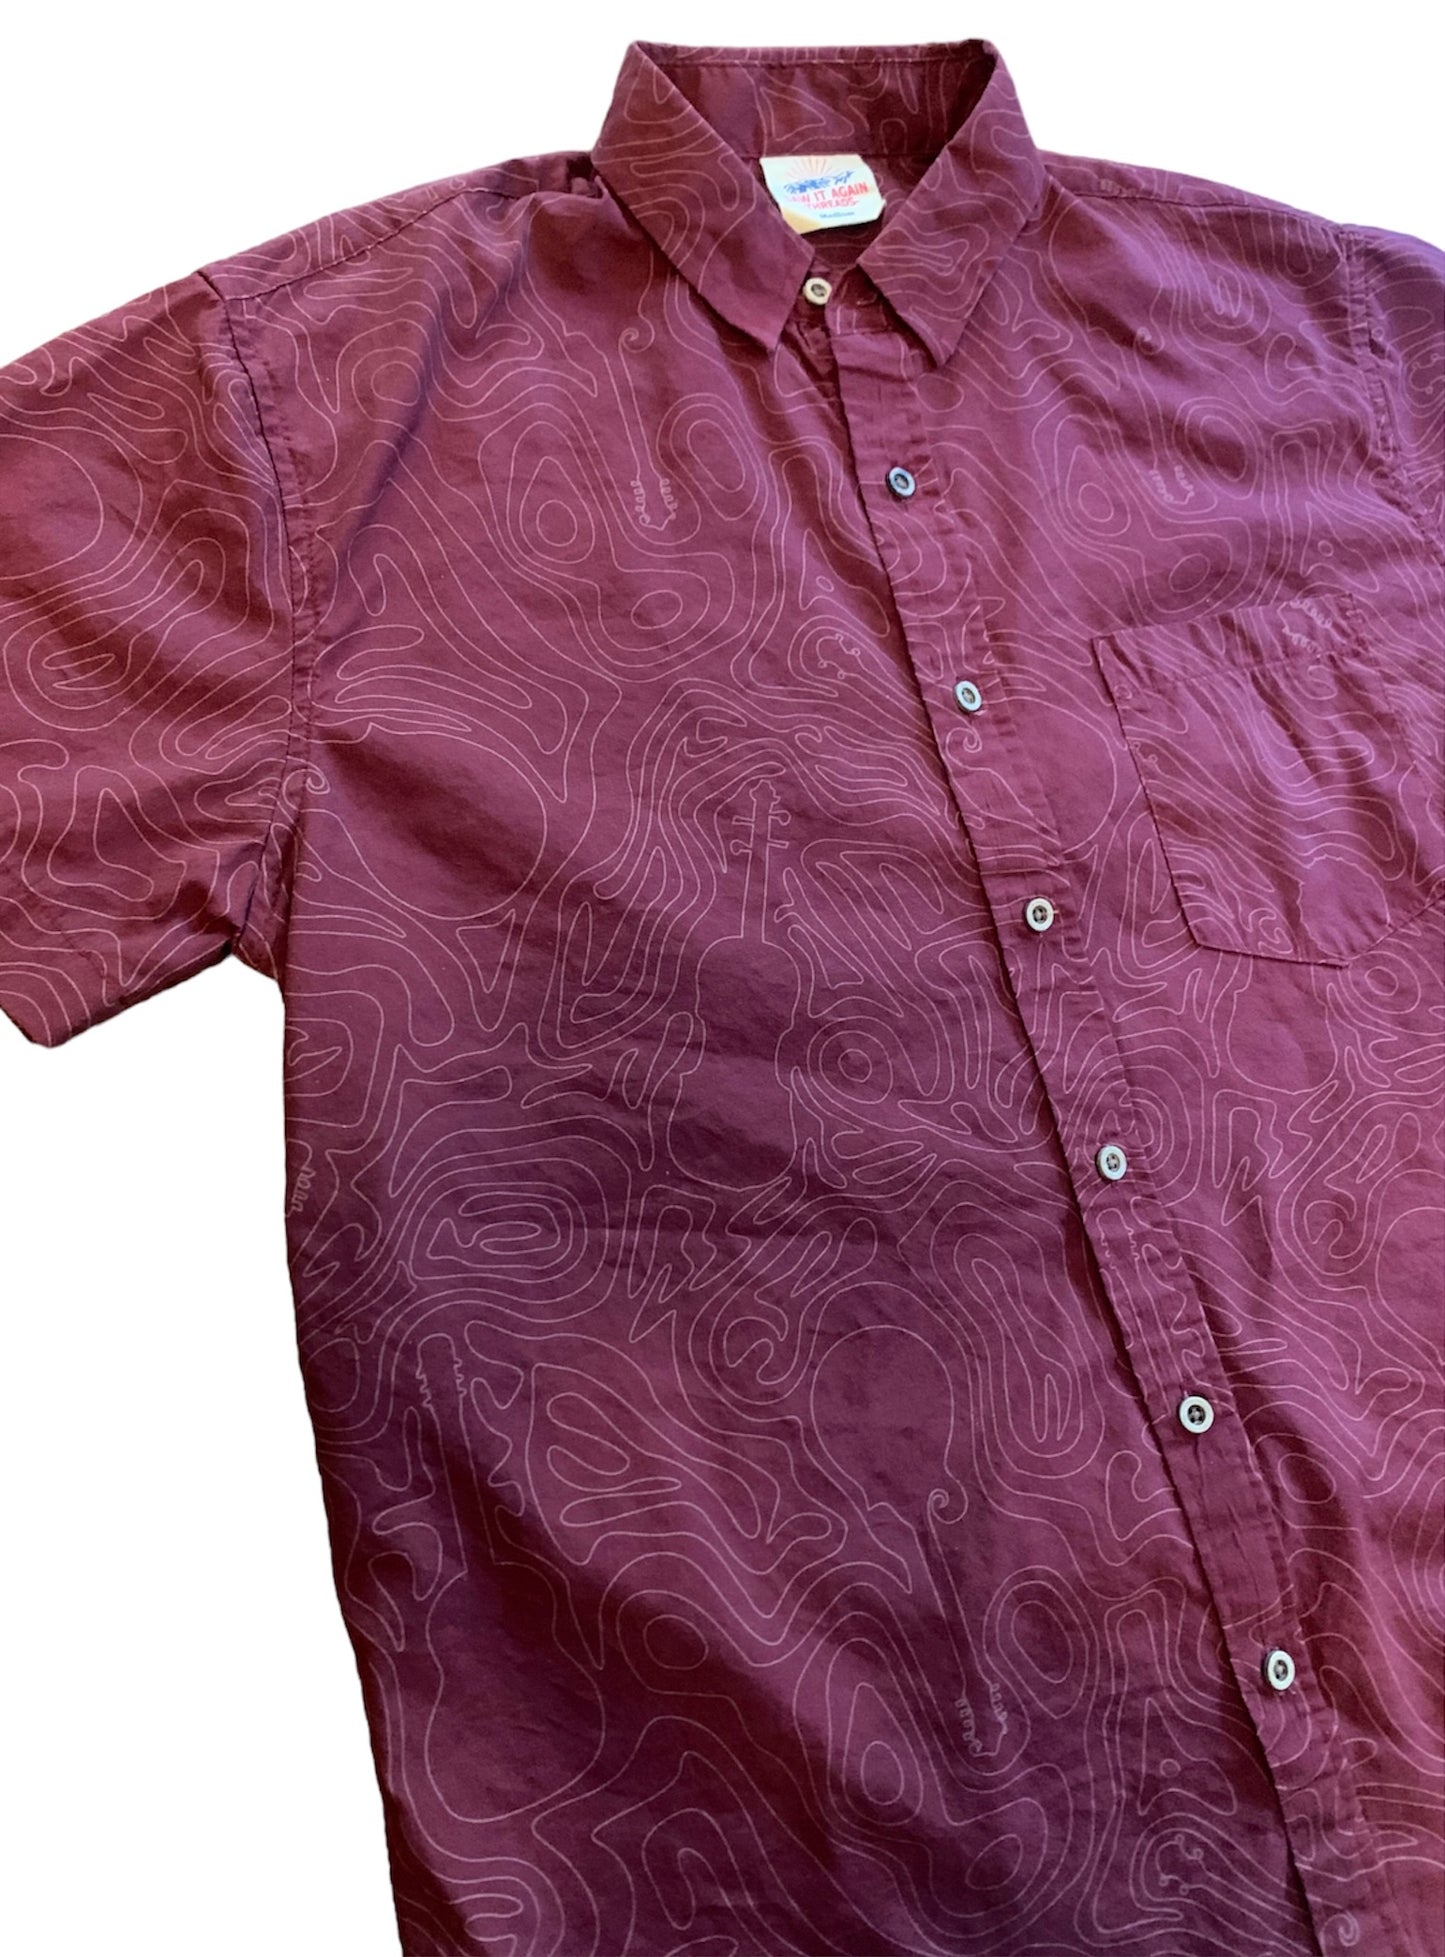 Bluegrass Topography Button Down Shirt Red